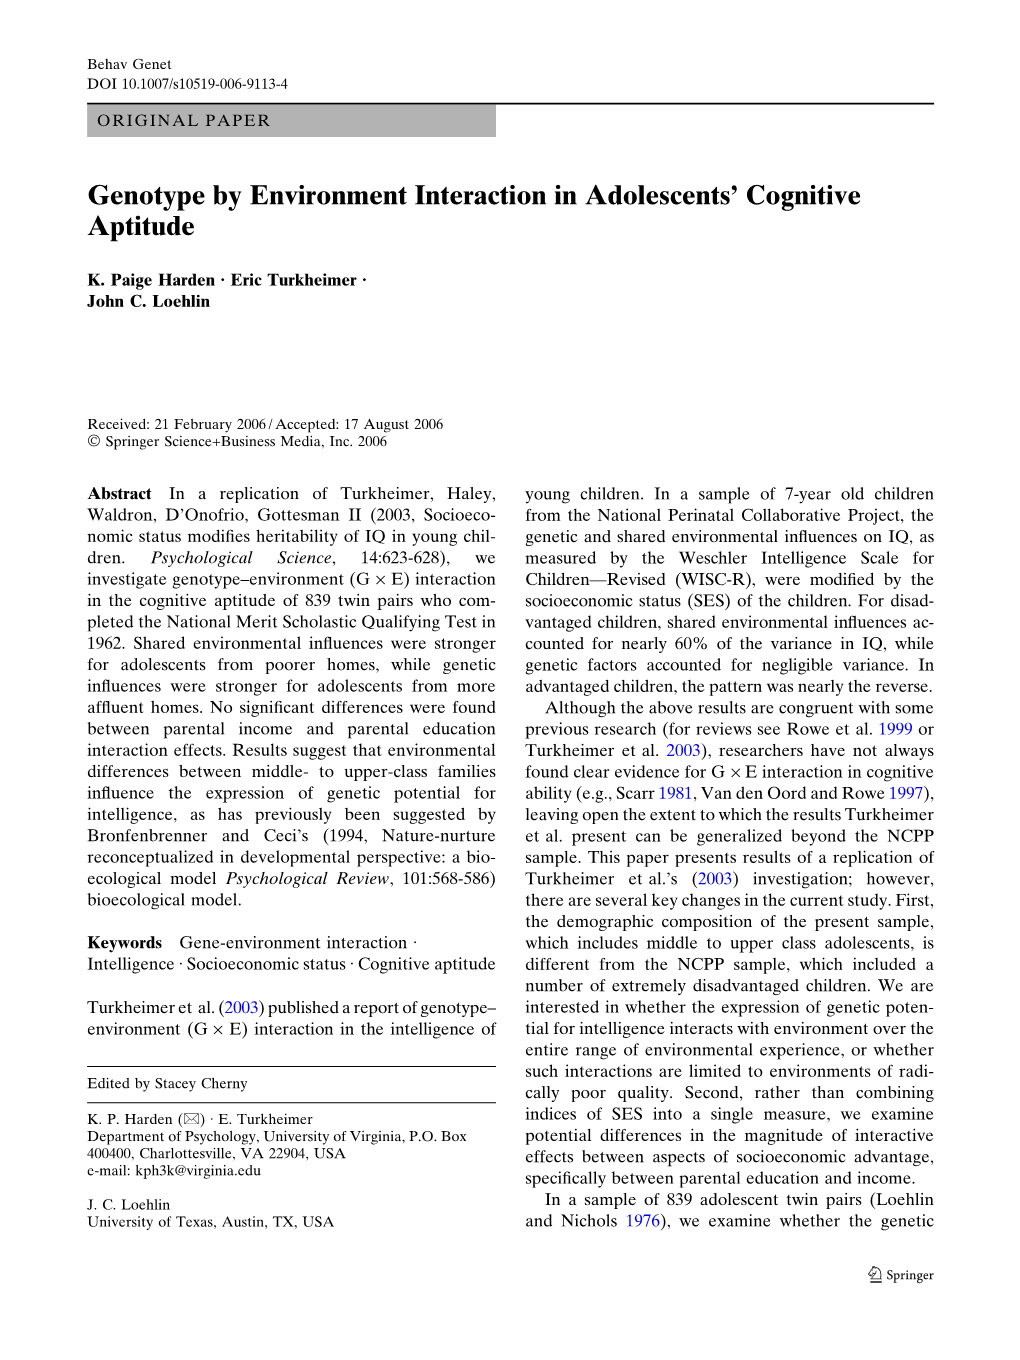 Genotype by Environment Interaction in Adolescents' Cognitive Aptitude